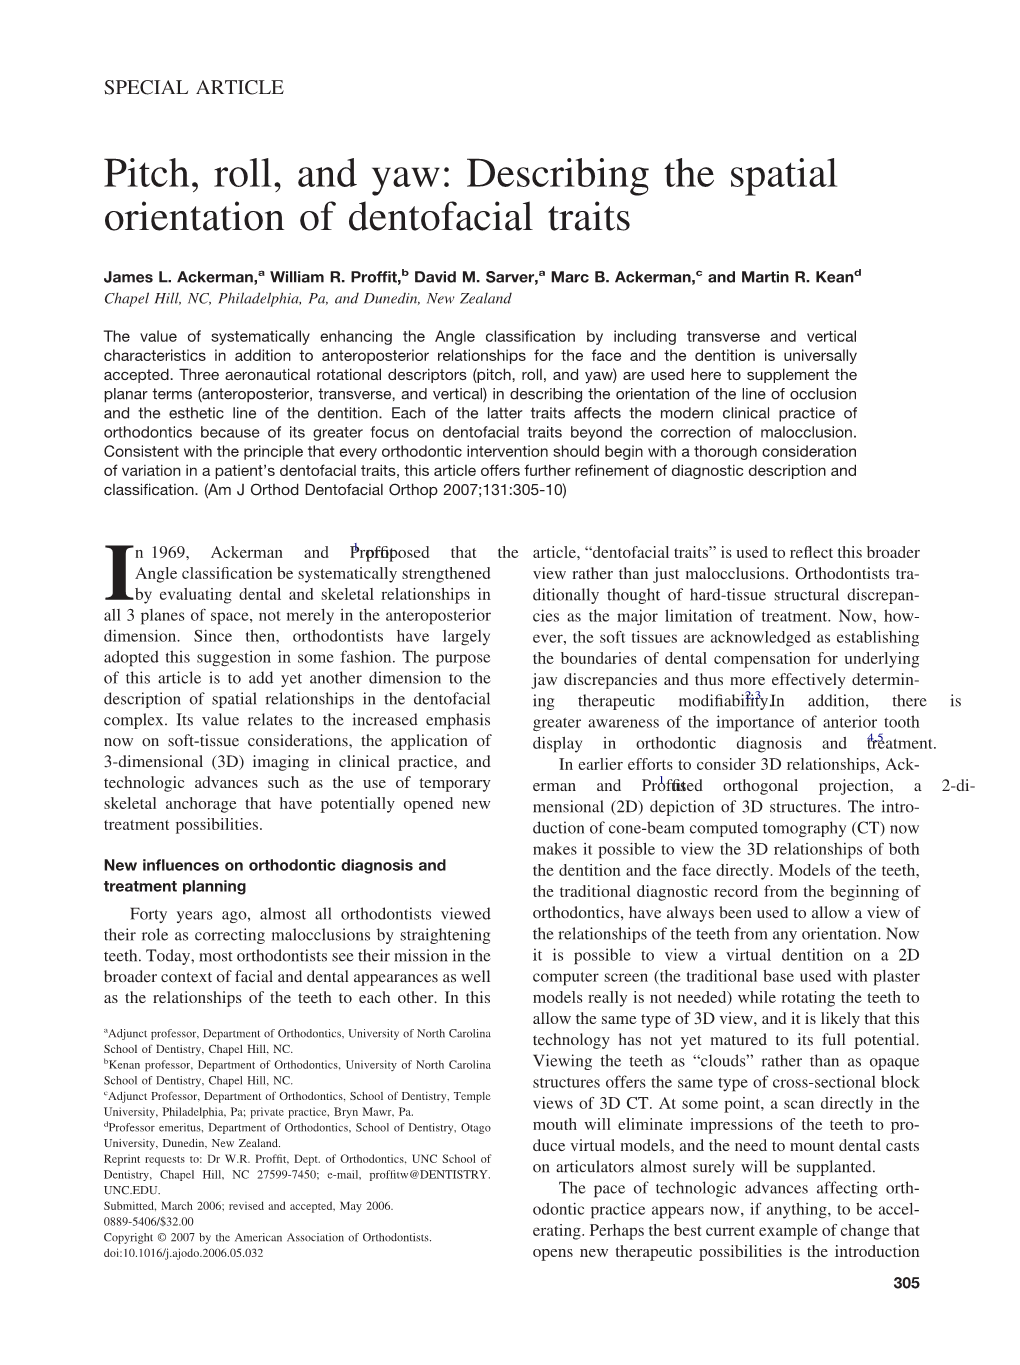 Pitch, Roll, and Yaw: Describing the Spatial Orientation of Dentofacial Traits